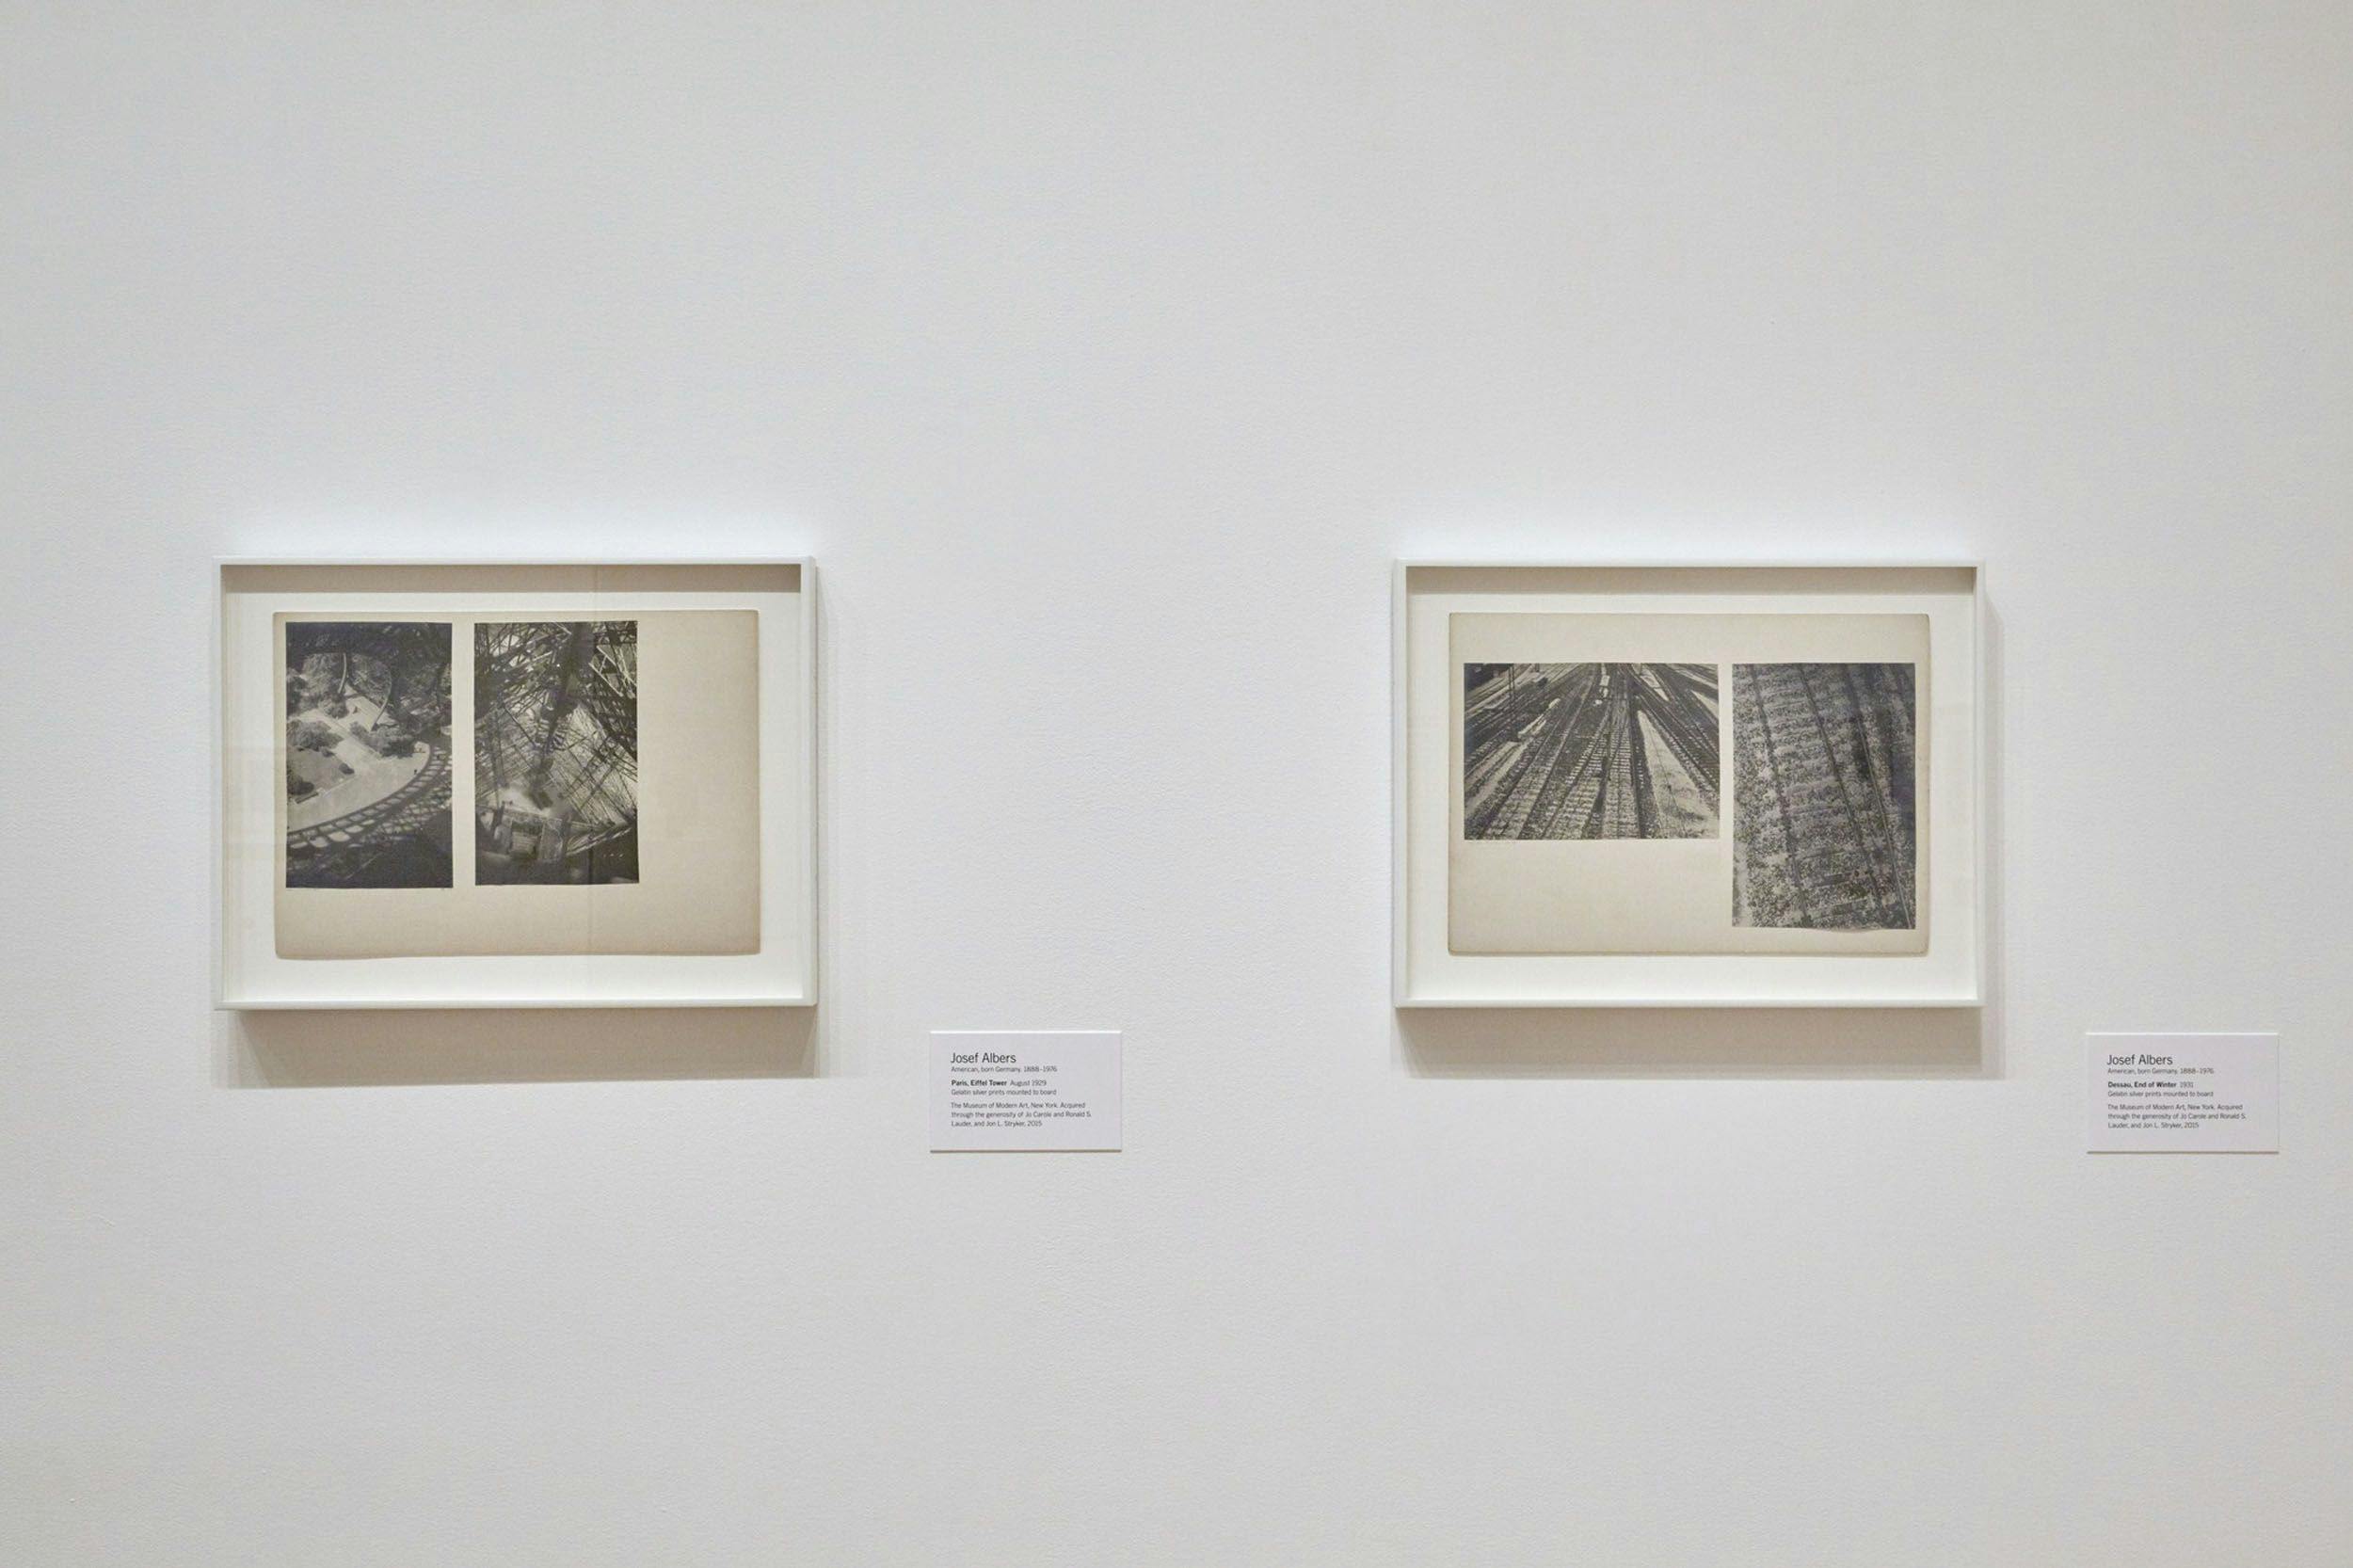 Installation view of the exhibition One and One Is Four: The Bauhaus Photocollages of Josef Albers¬†at The Museum of Modern Art, dated 2016 to 2017.